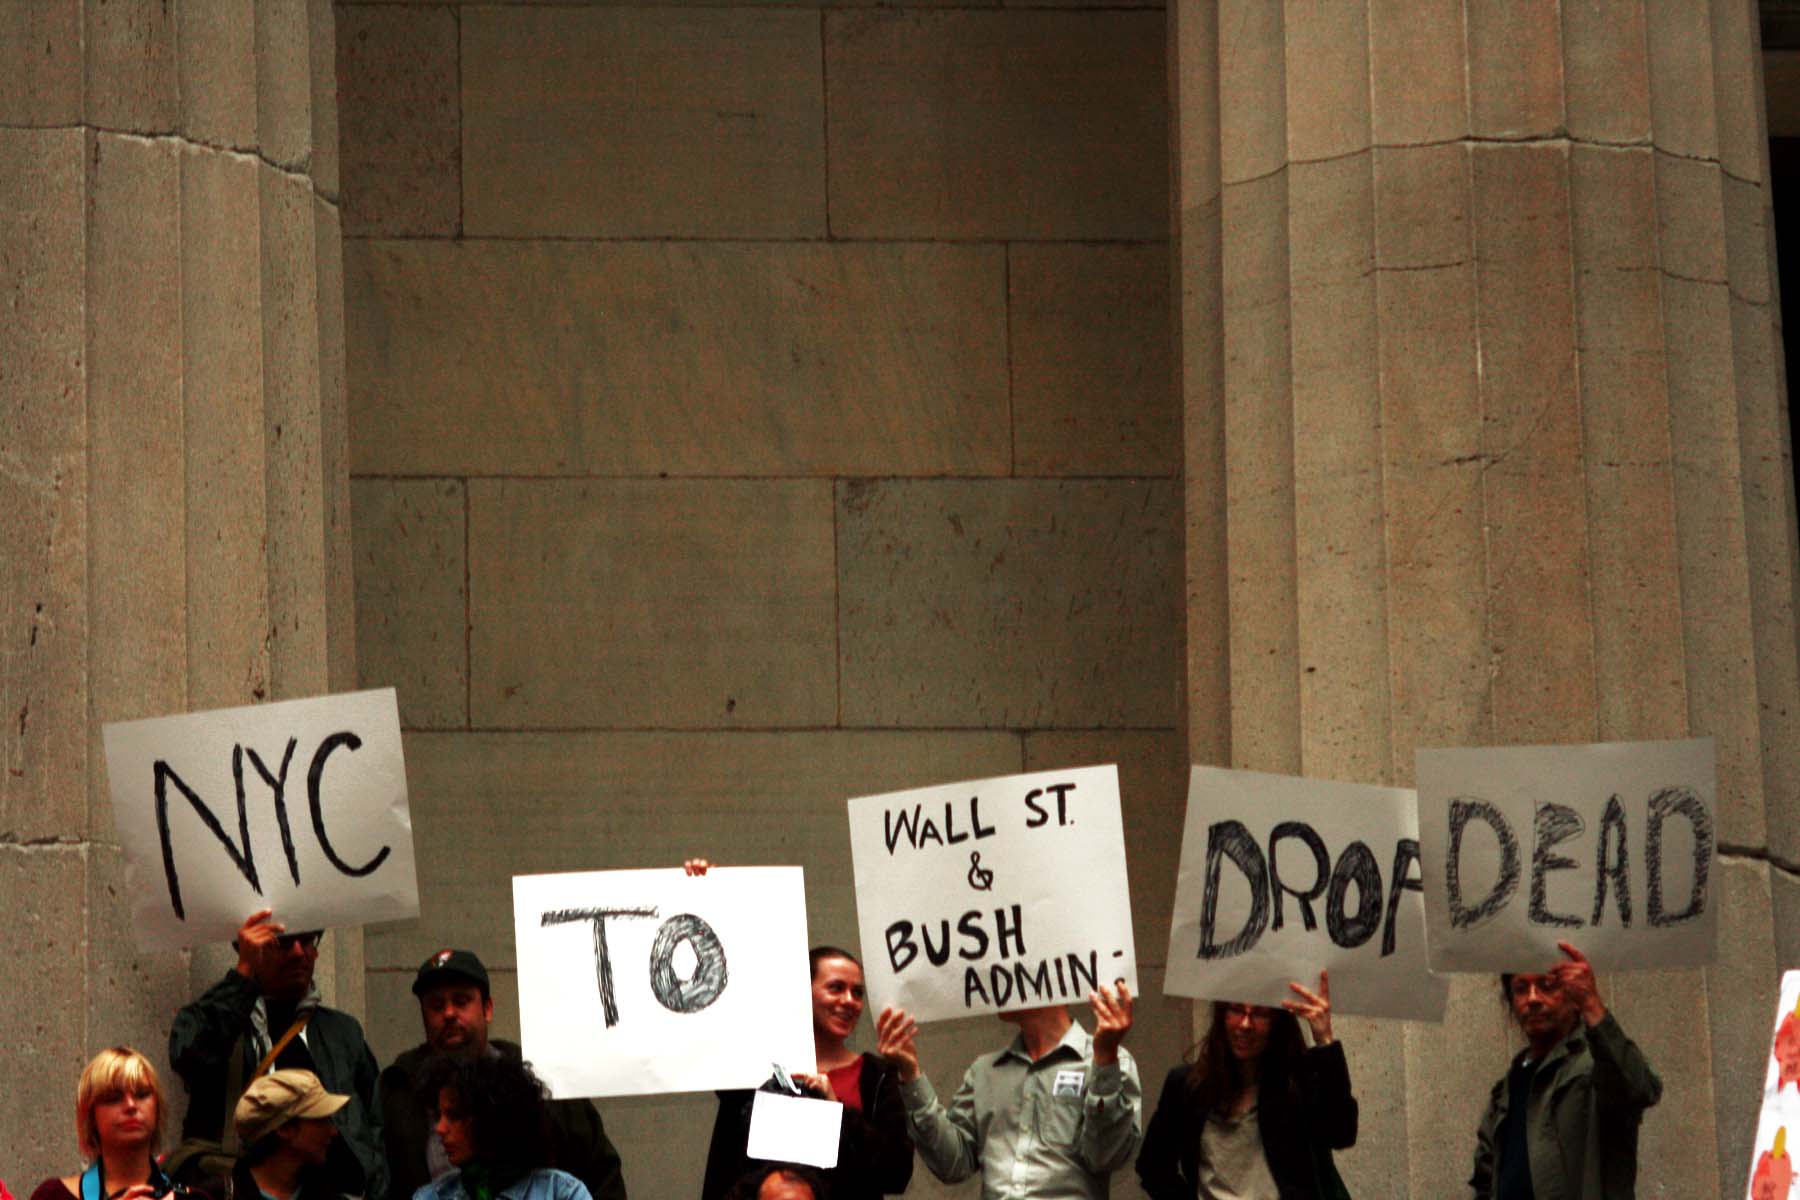 NYC TO WALL ST.: BUSH / CHENEY: DROP DEAD.